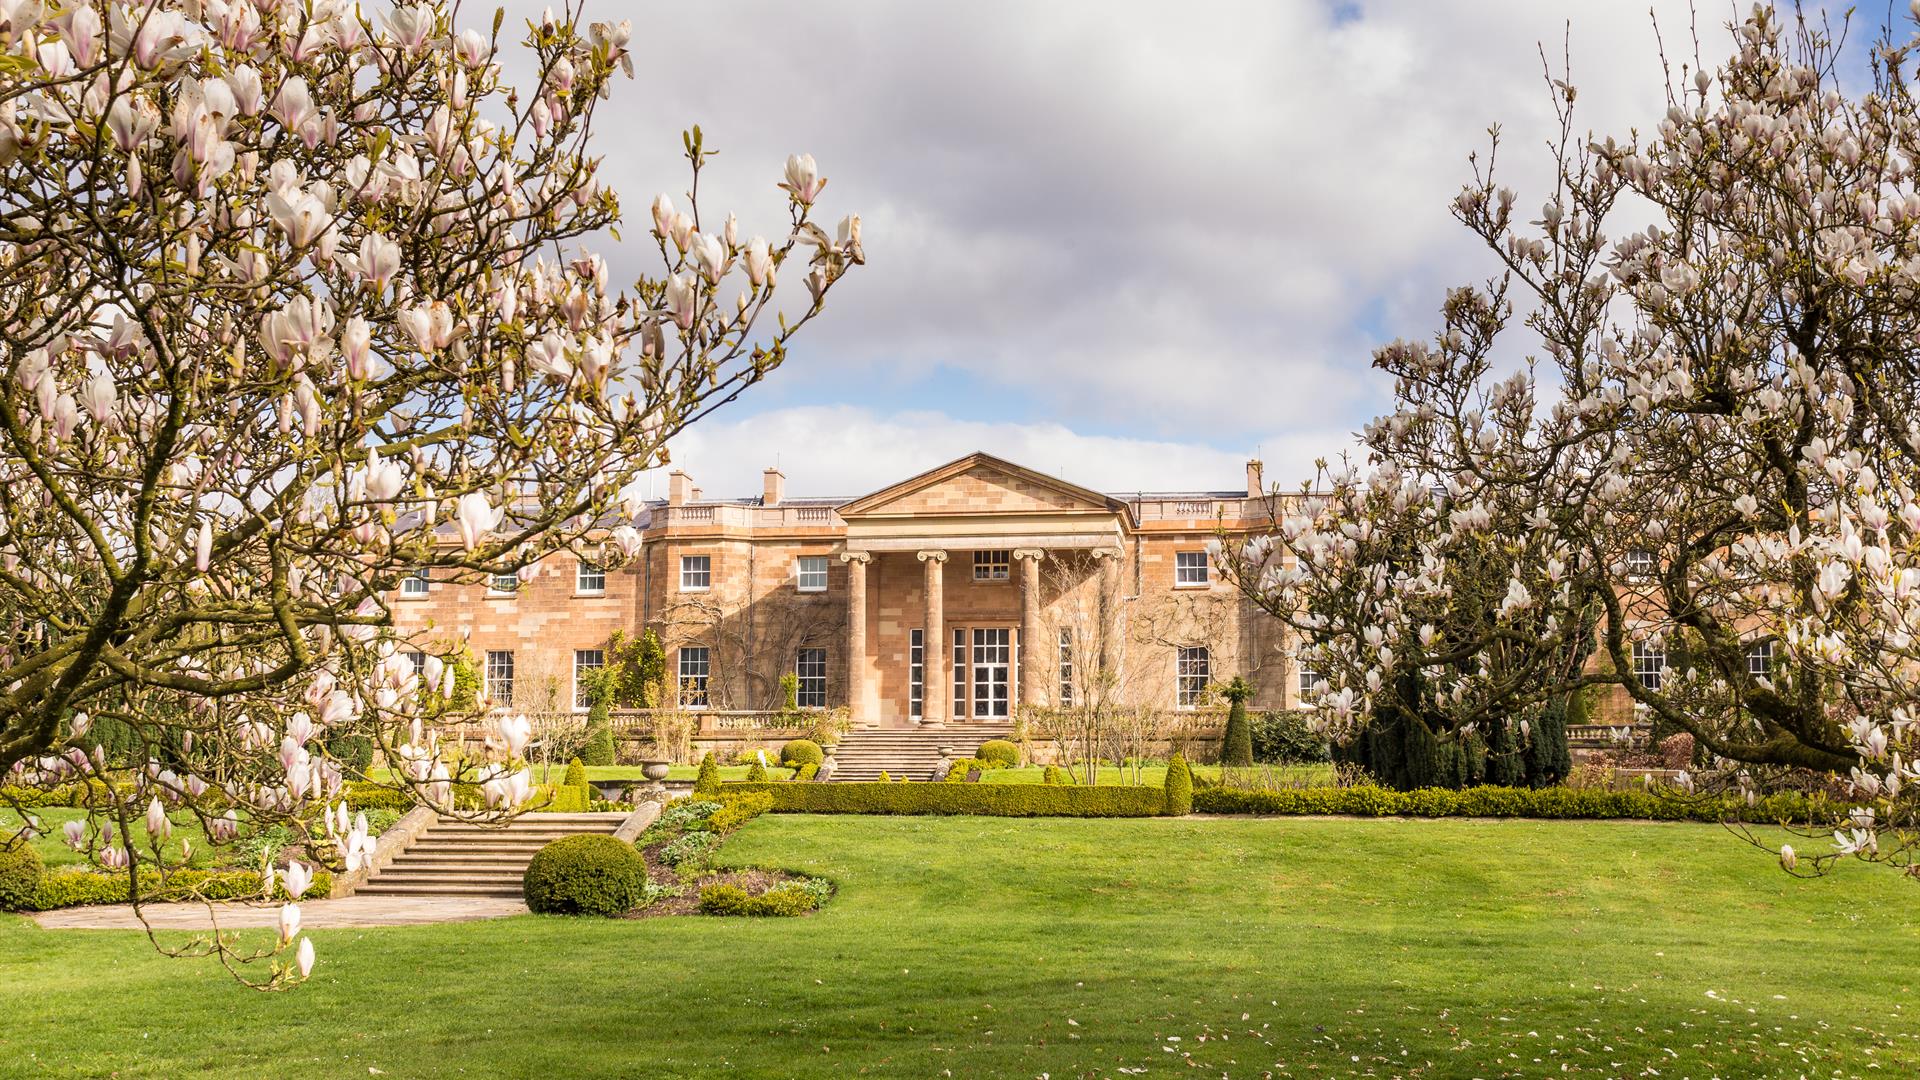 Image is of the rear of Hillsborough Castle showing trees and lawn